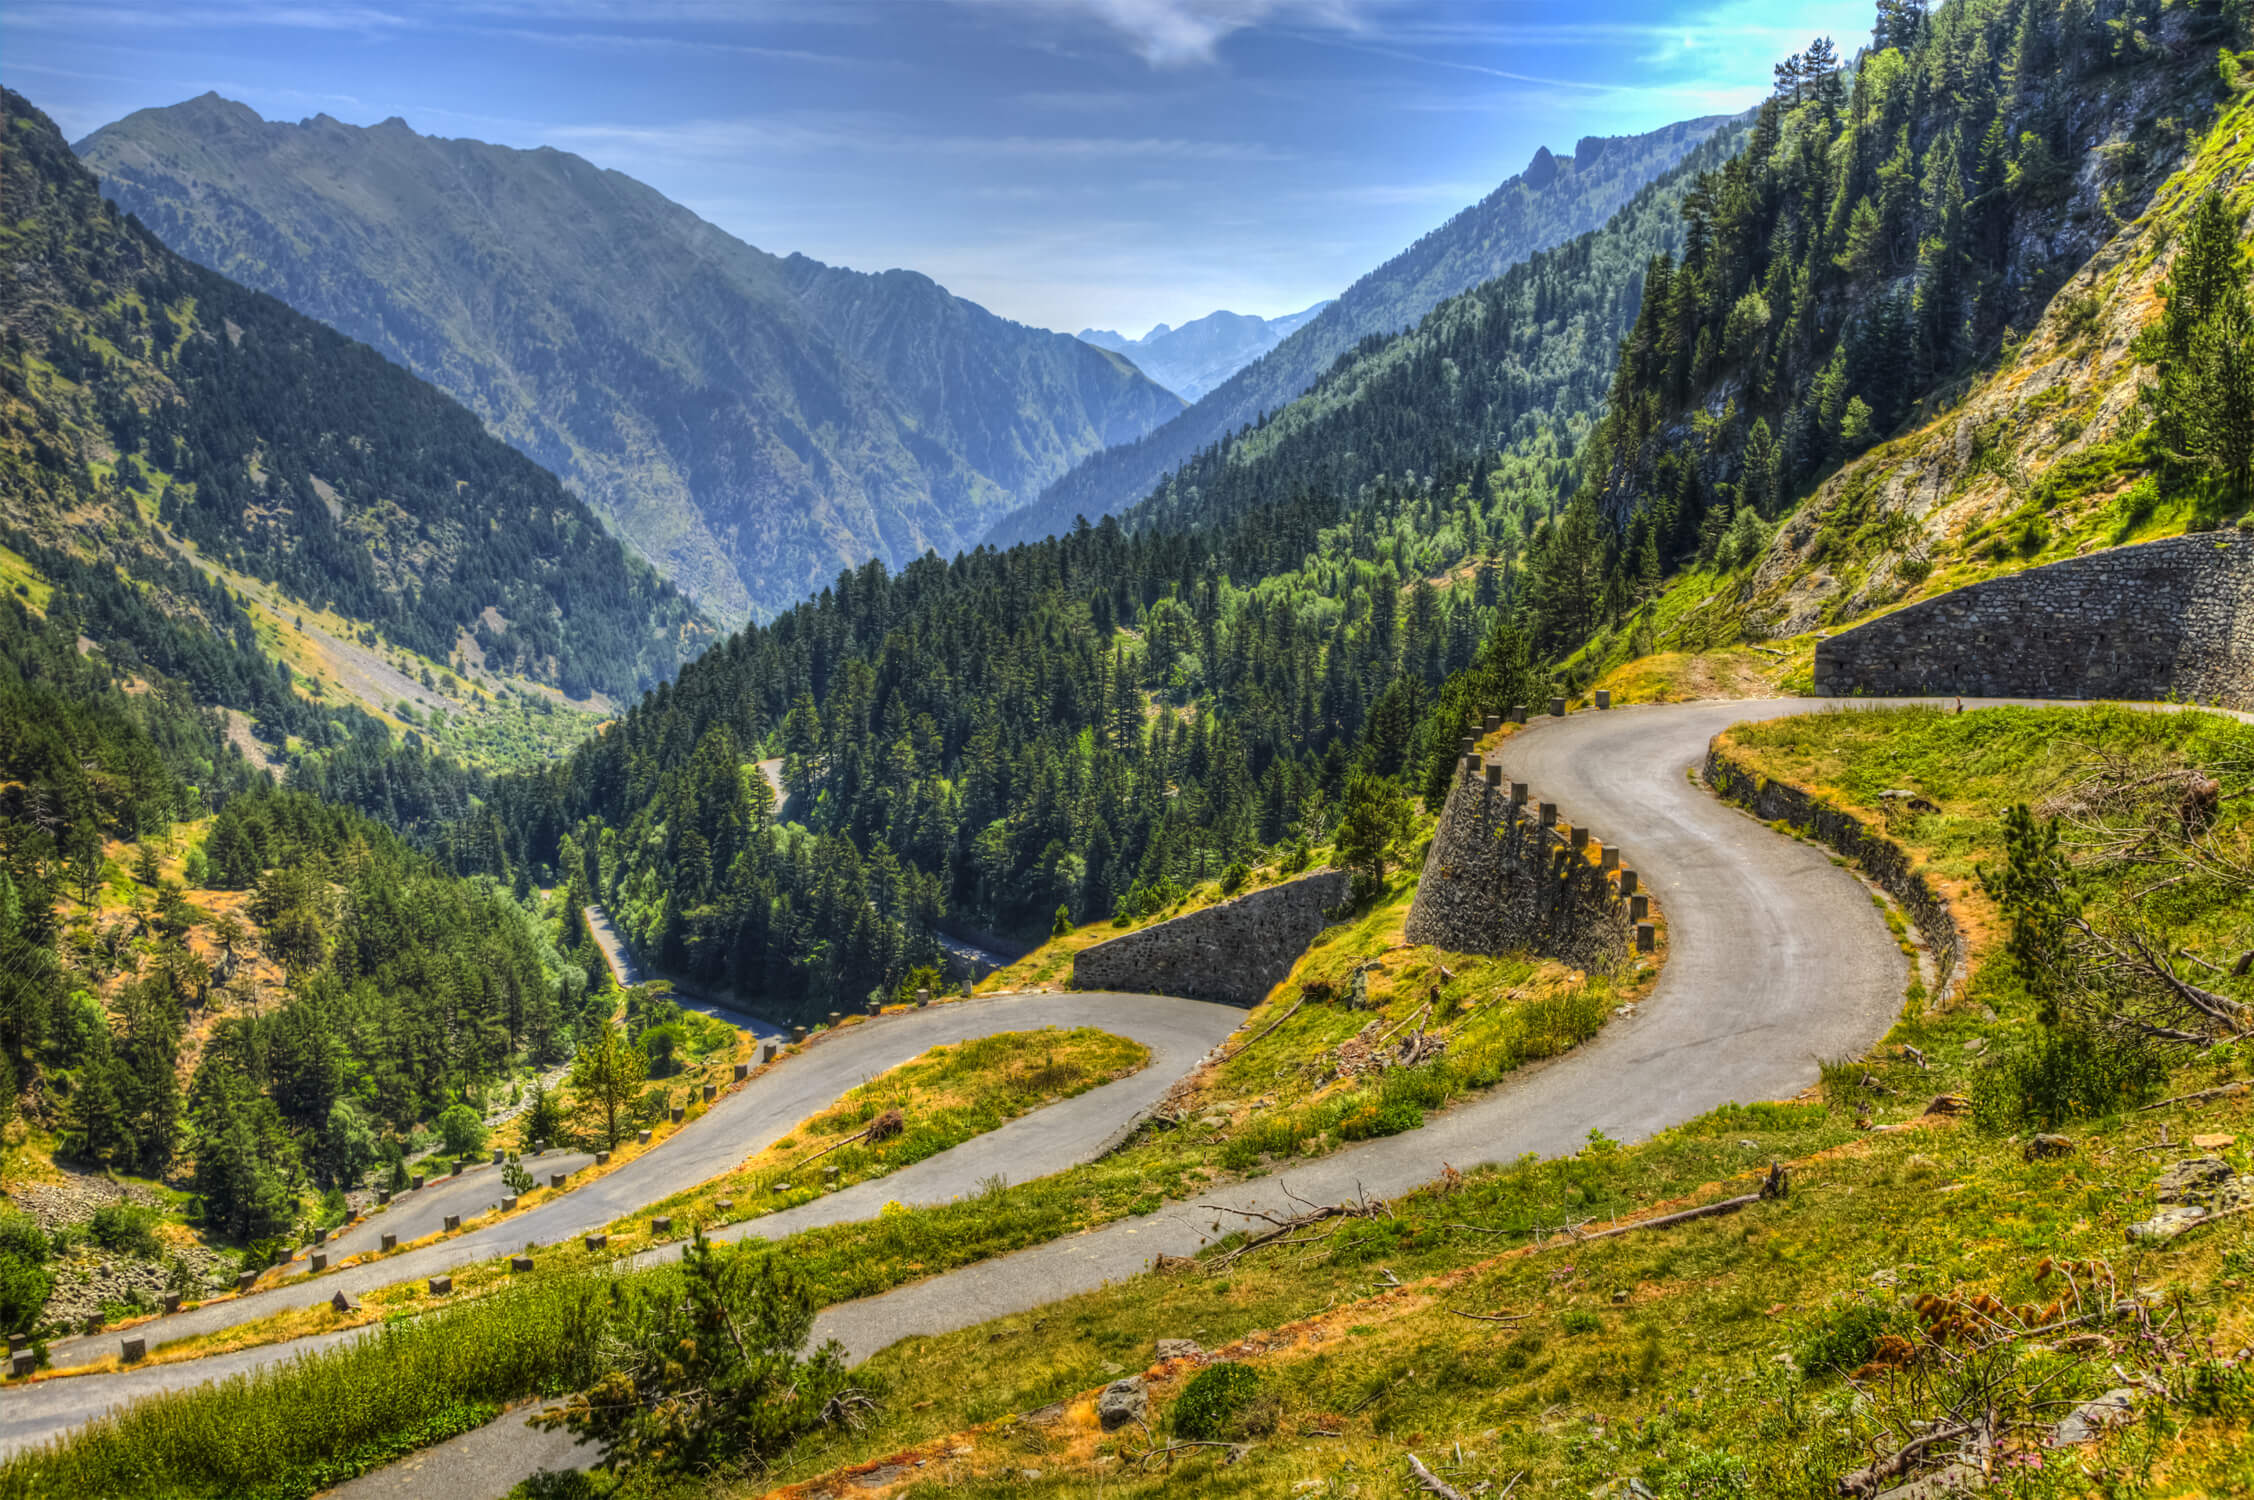 A winding road in the mountains of the Pyrenees